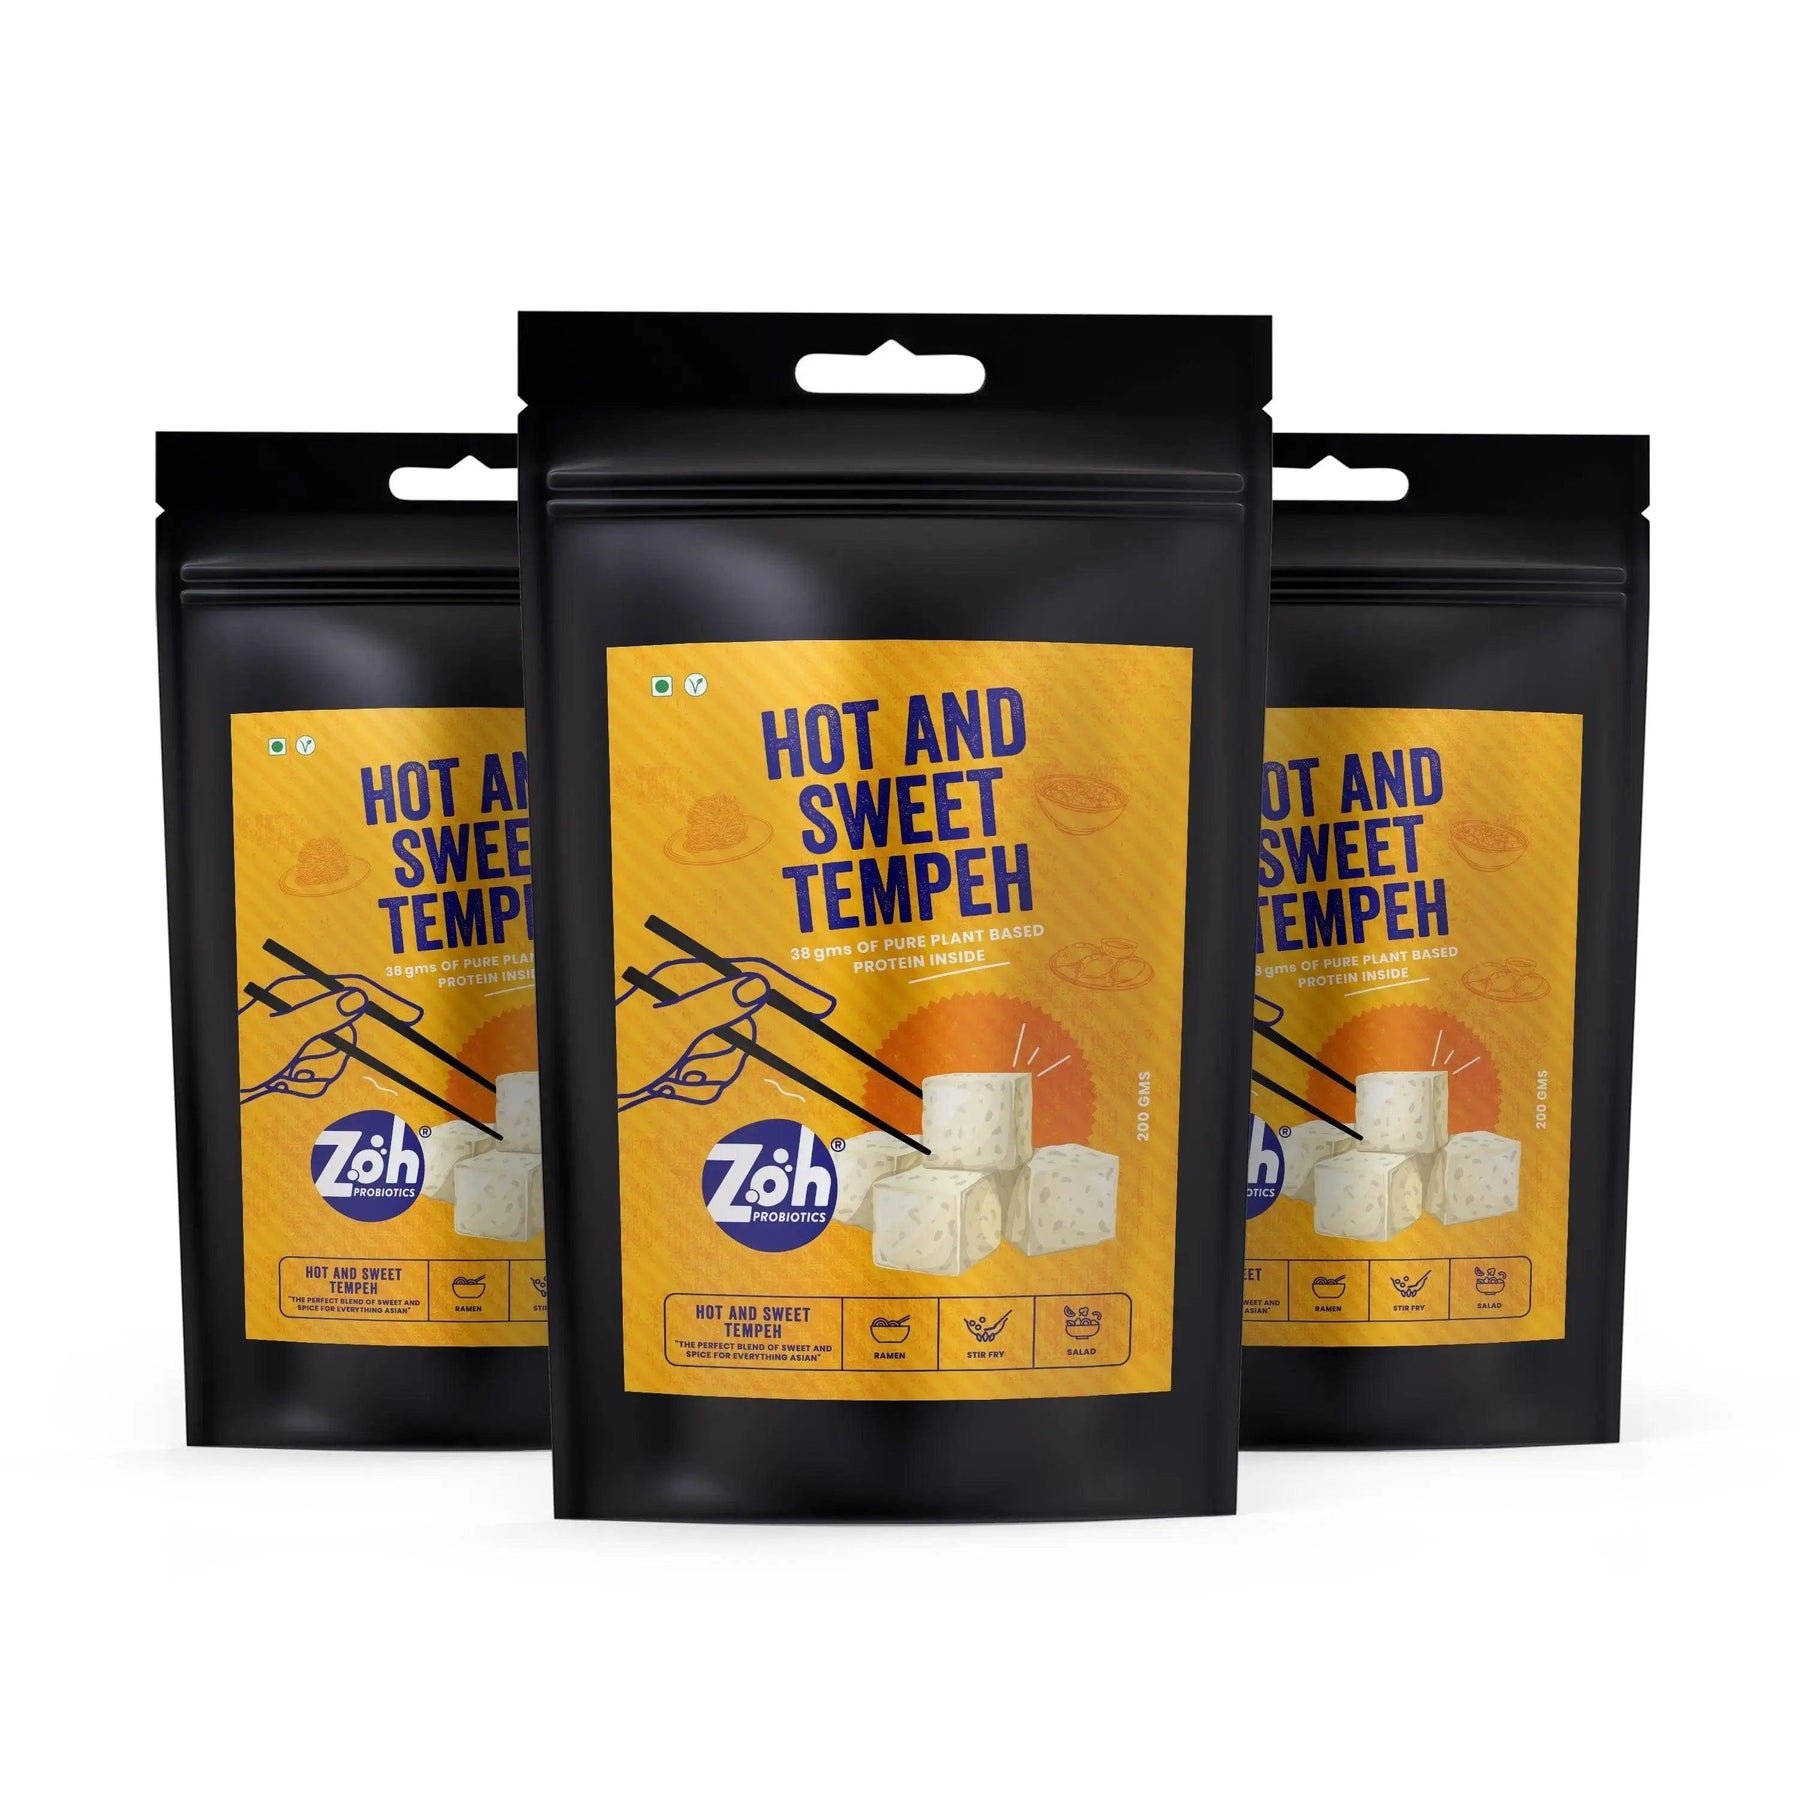 Bulk buy eco-friendly Zoh Hot and Sweet Tempeh pack of 3: Savory protein-rich meals in Mumbai